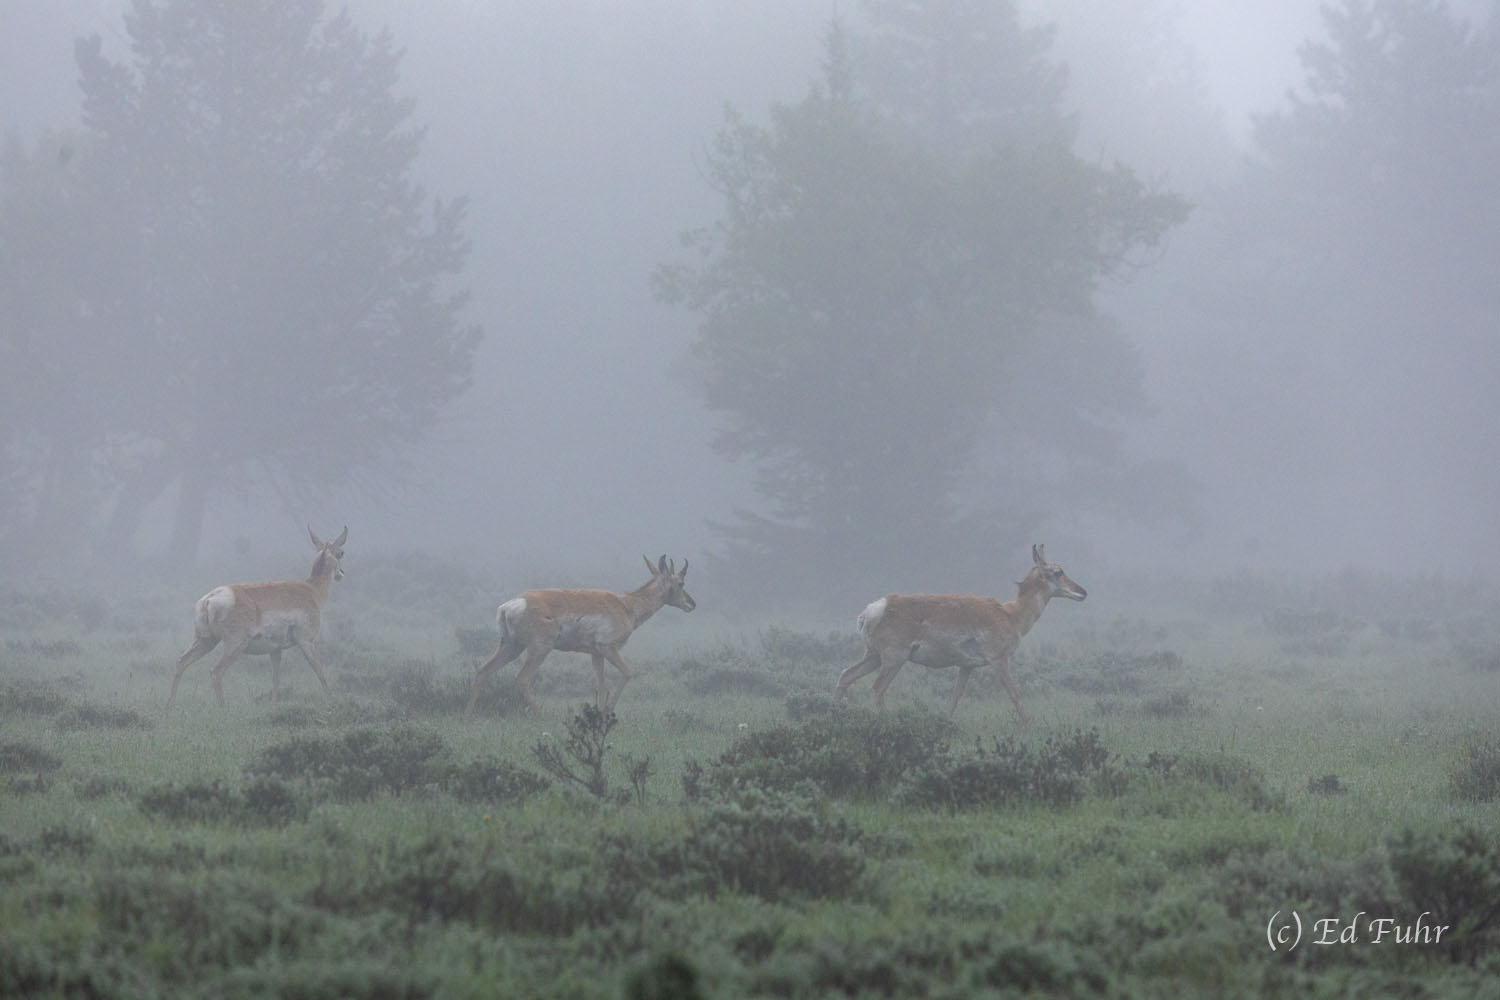 A family of pronghorn antelopes move across the sage in the cover of fog.